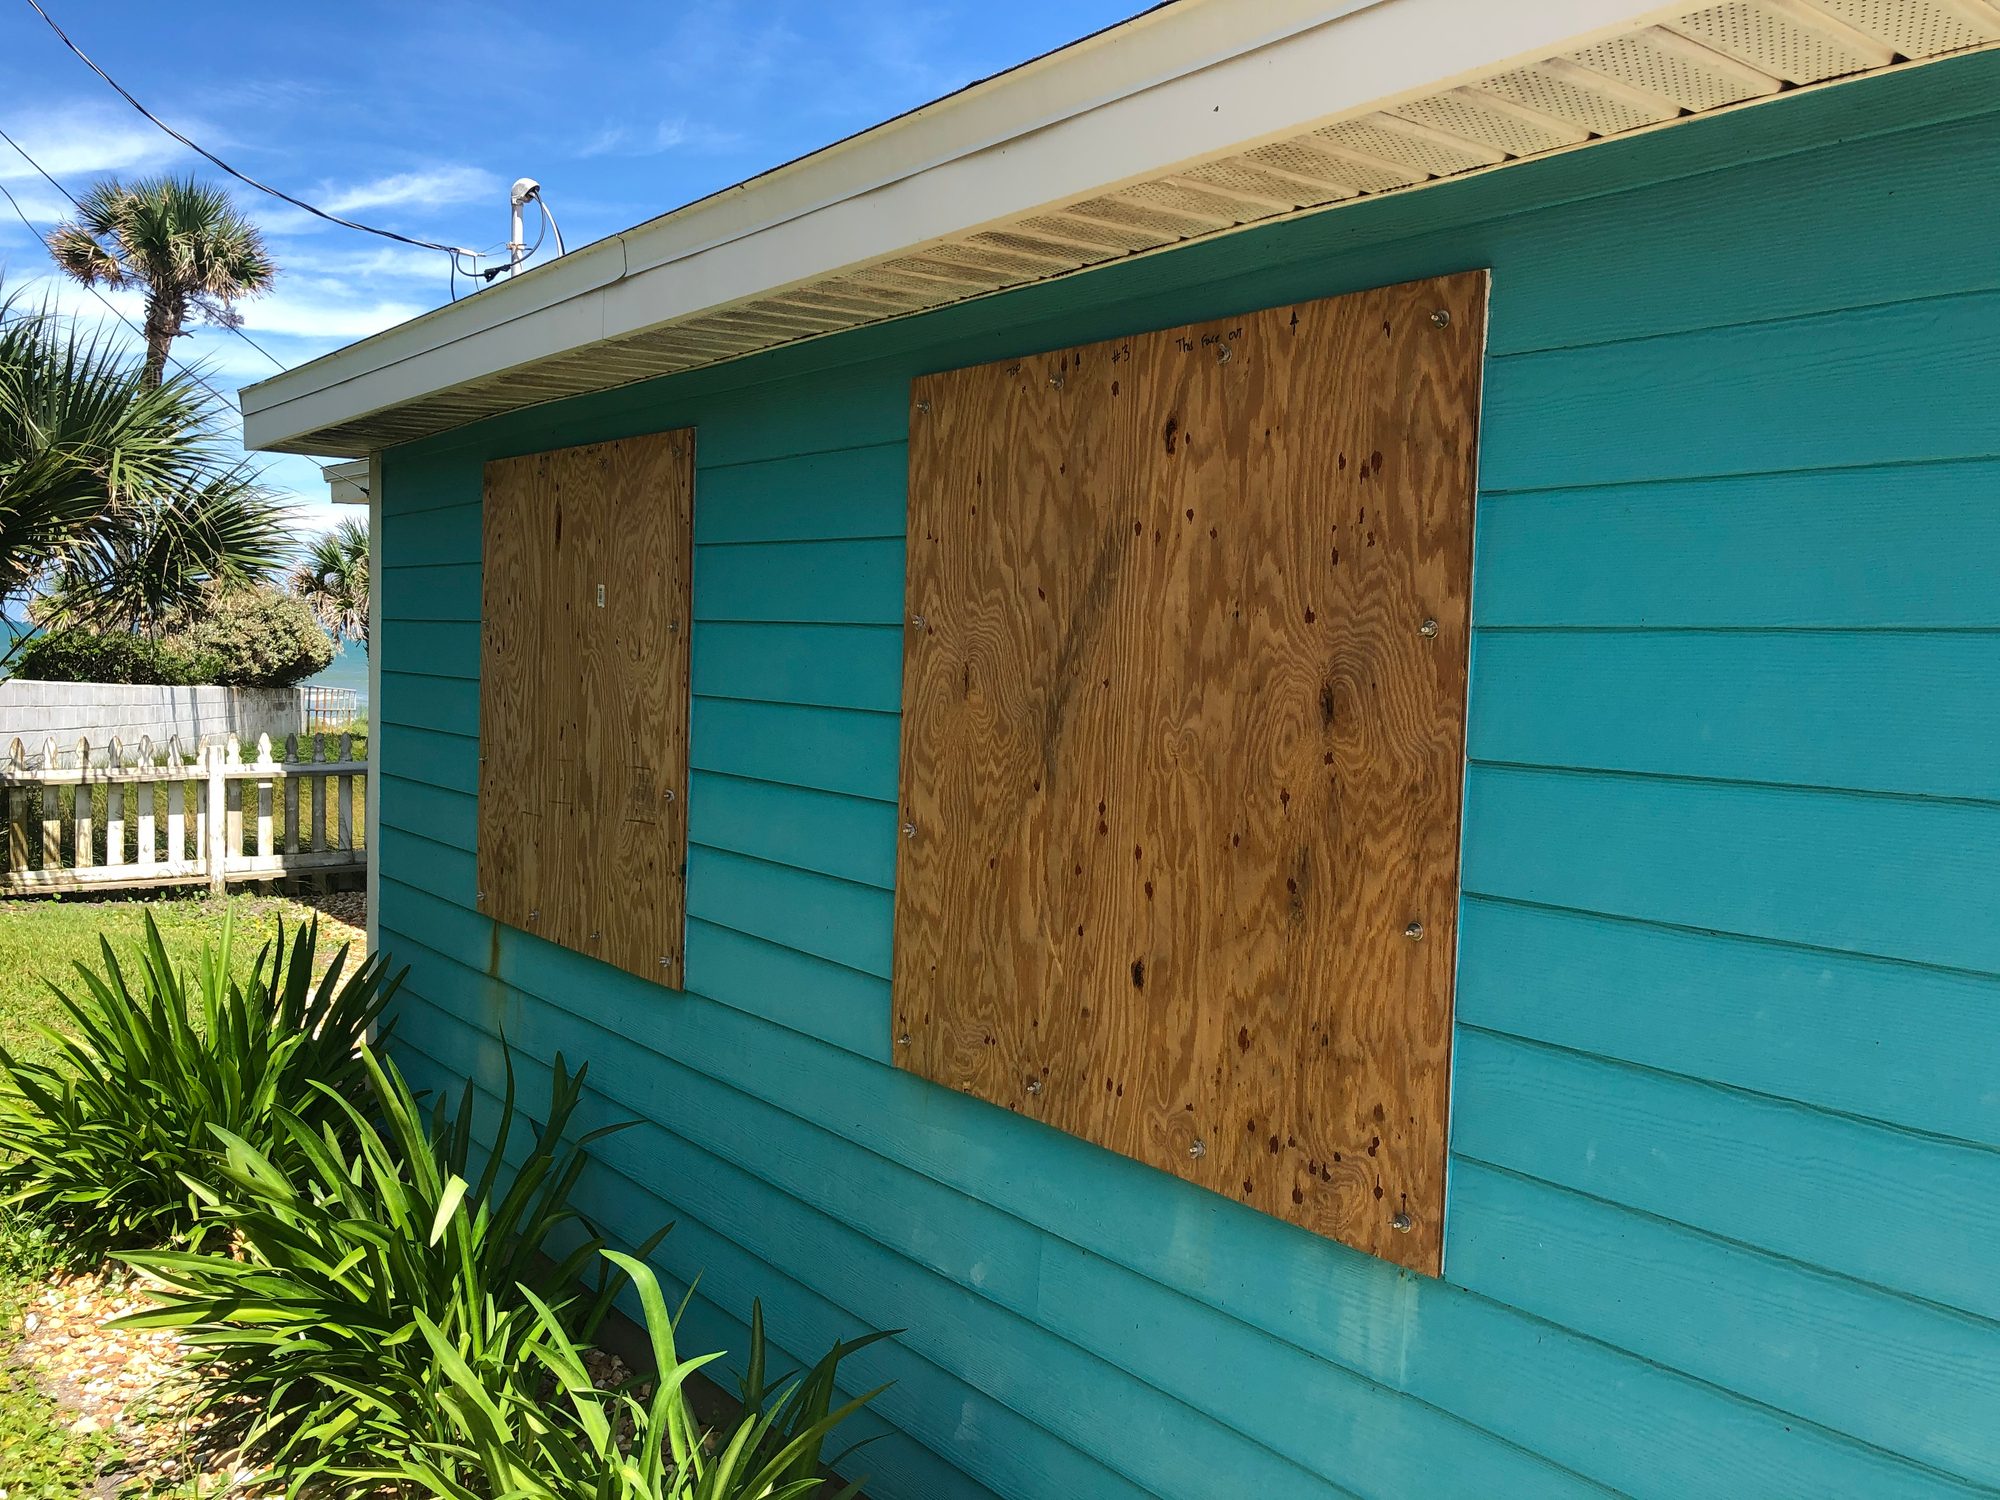 Plywood covers the windows of a beach cottage in Florida in preparation for an oncoming hurricane